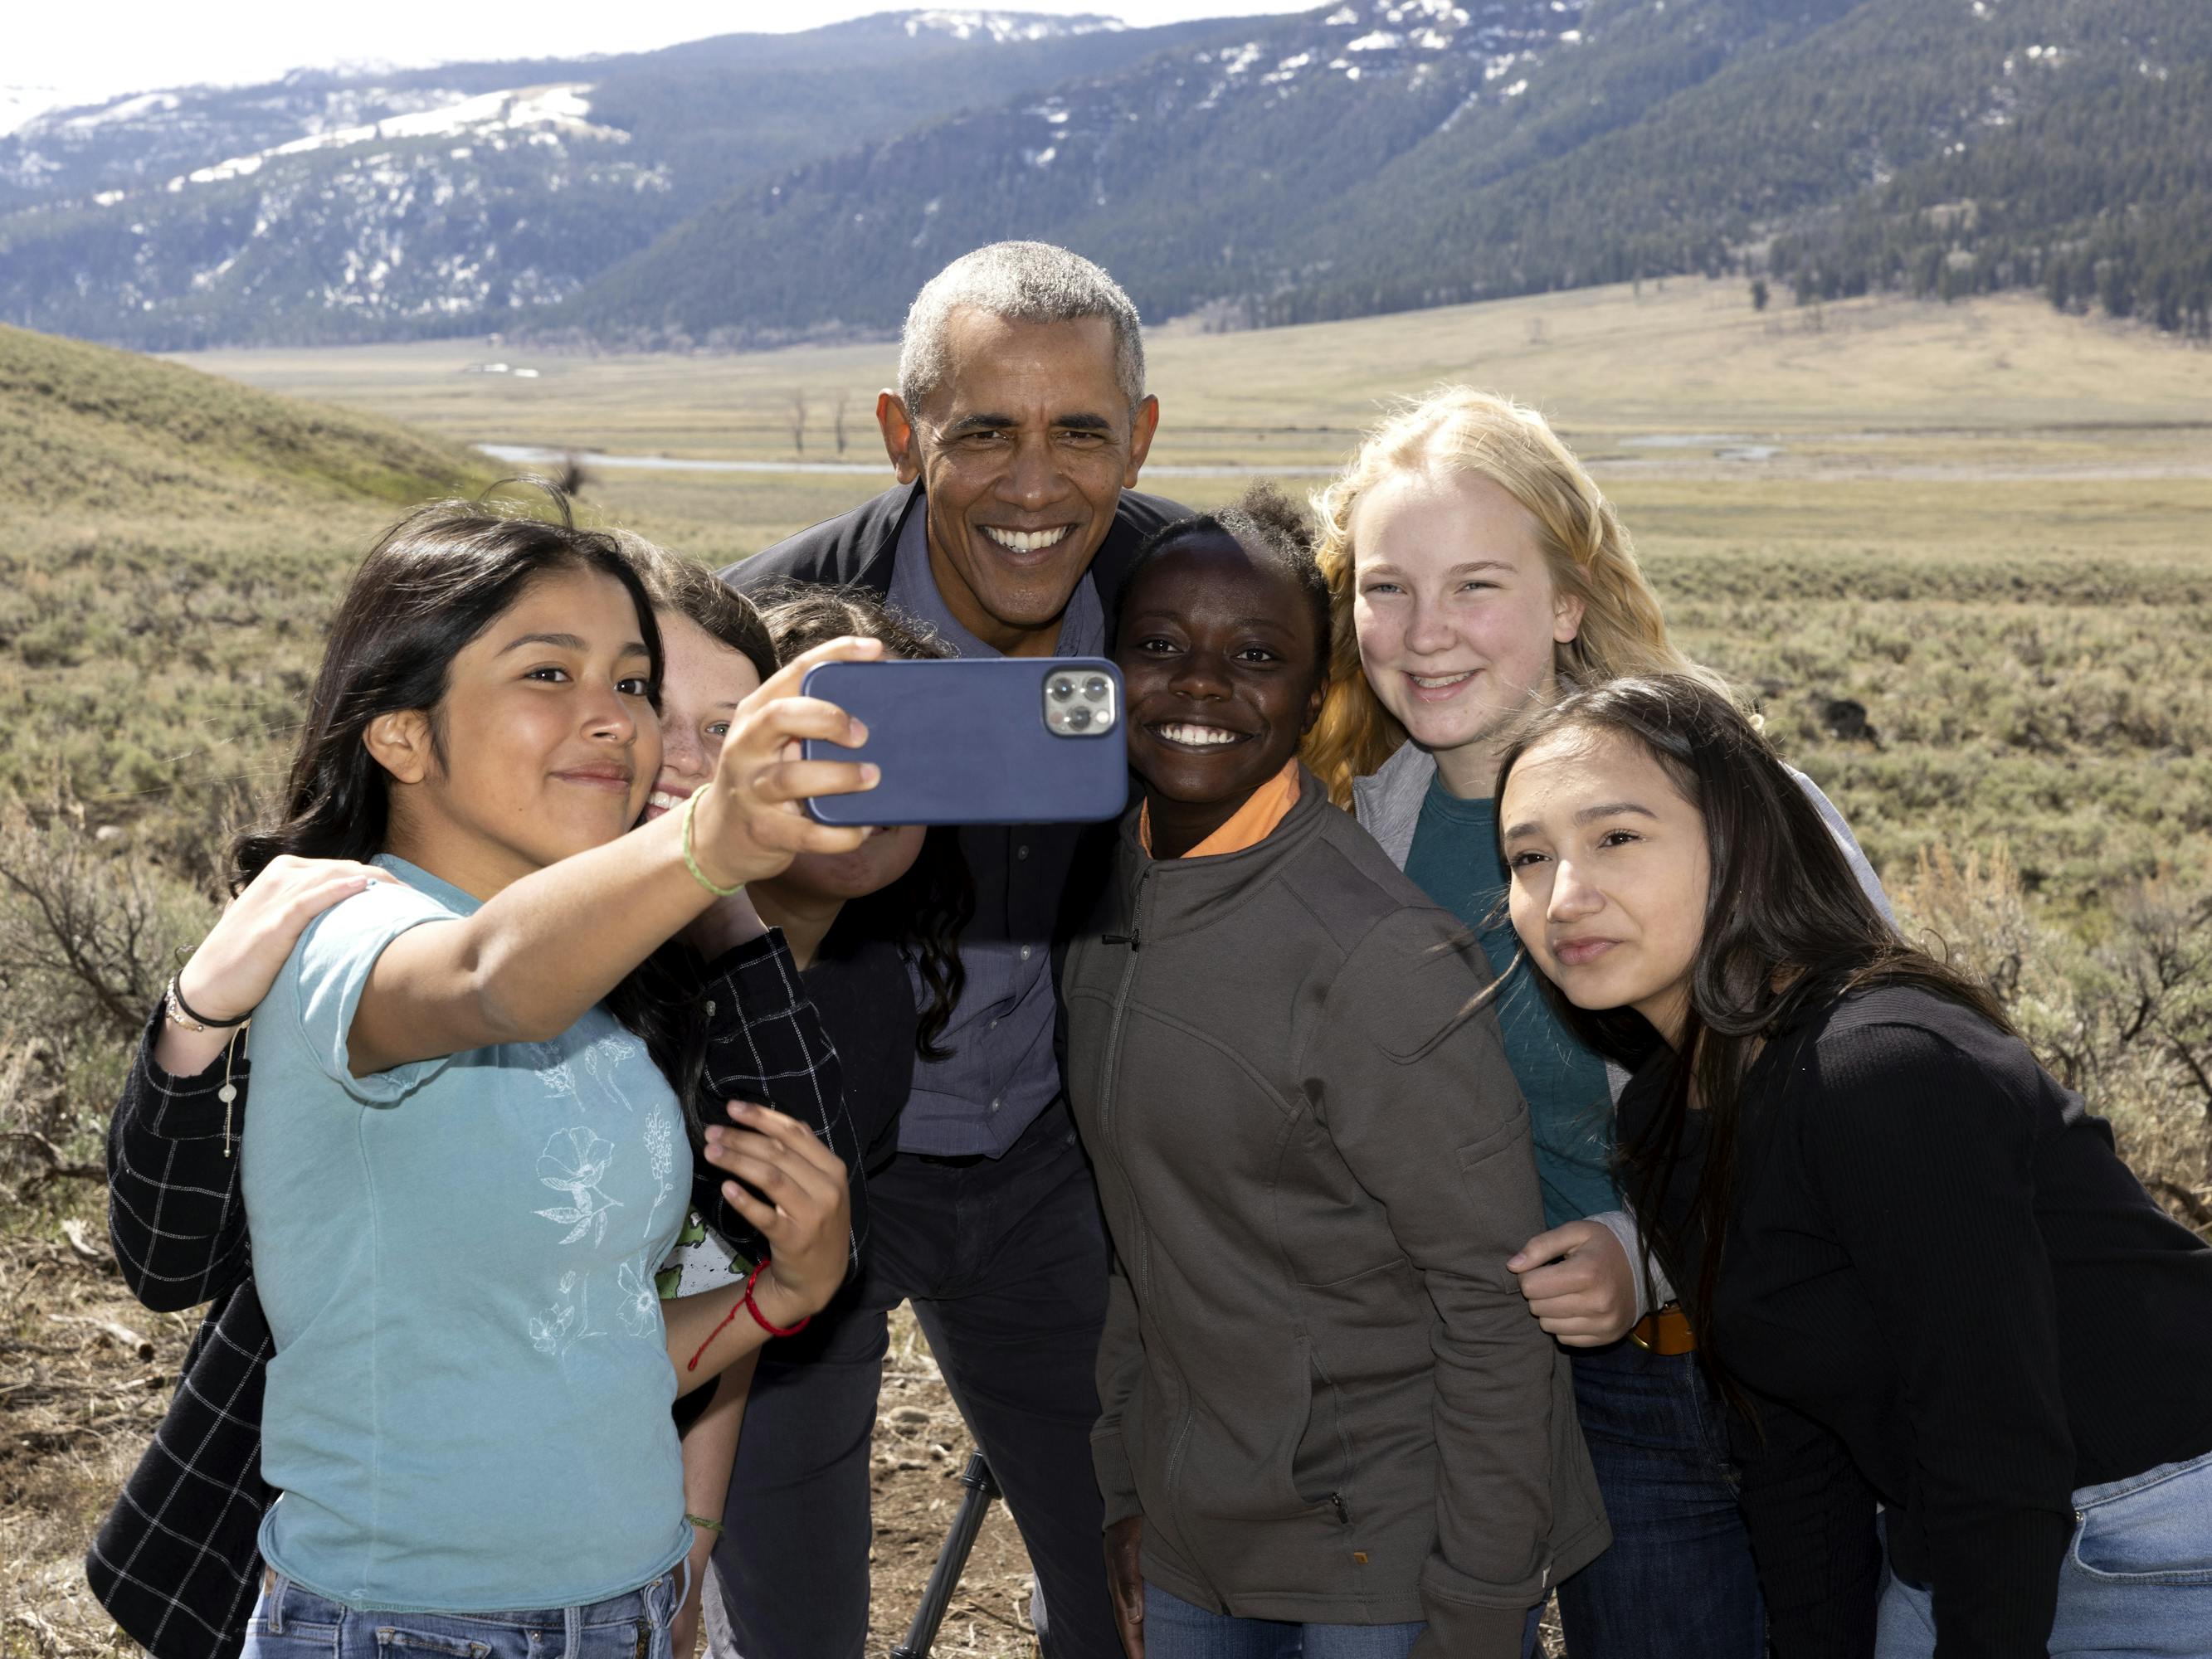 Barack Obama takes a selfie with some people in a grassy expanse.